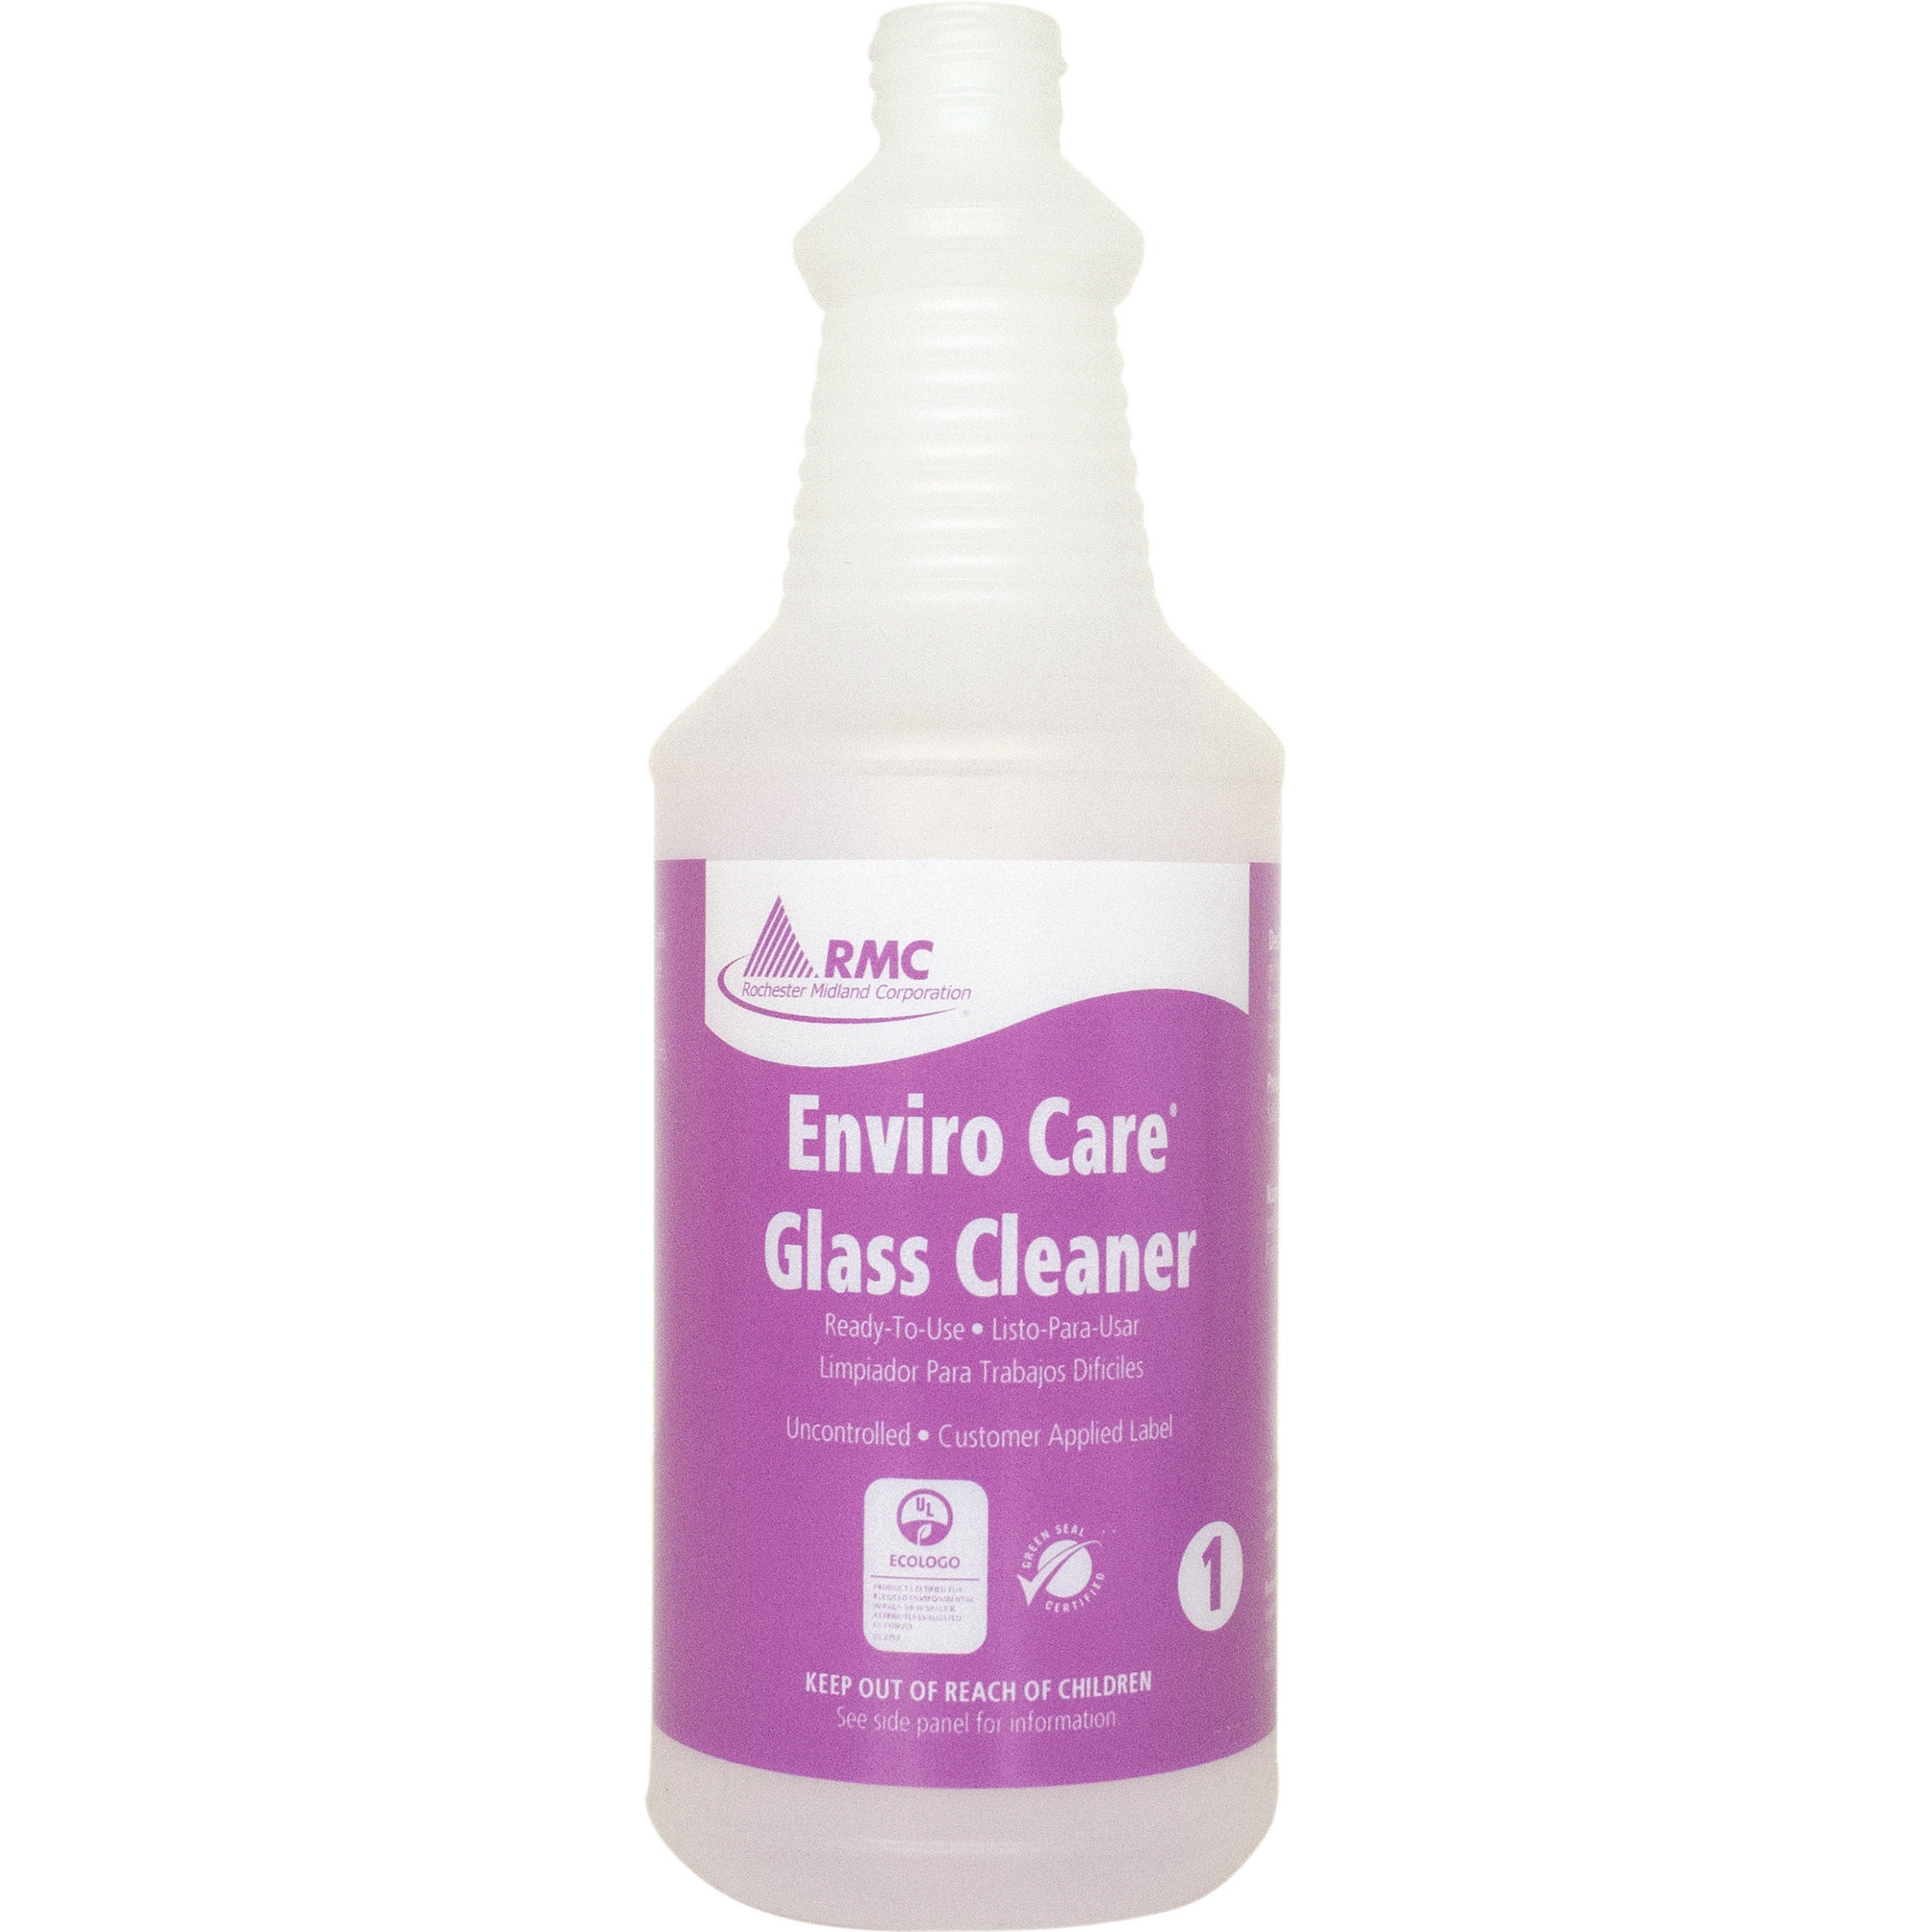 rmc-glass-cleaner-spray-bottle-48-carton-frosted-clear-plastic_rcm35064373ct - 1